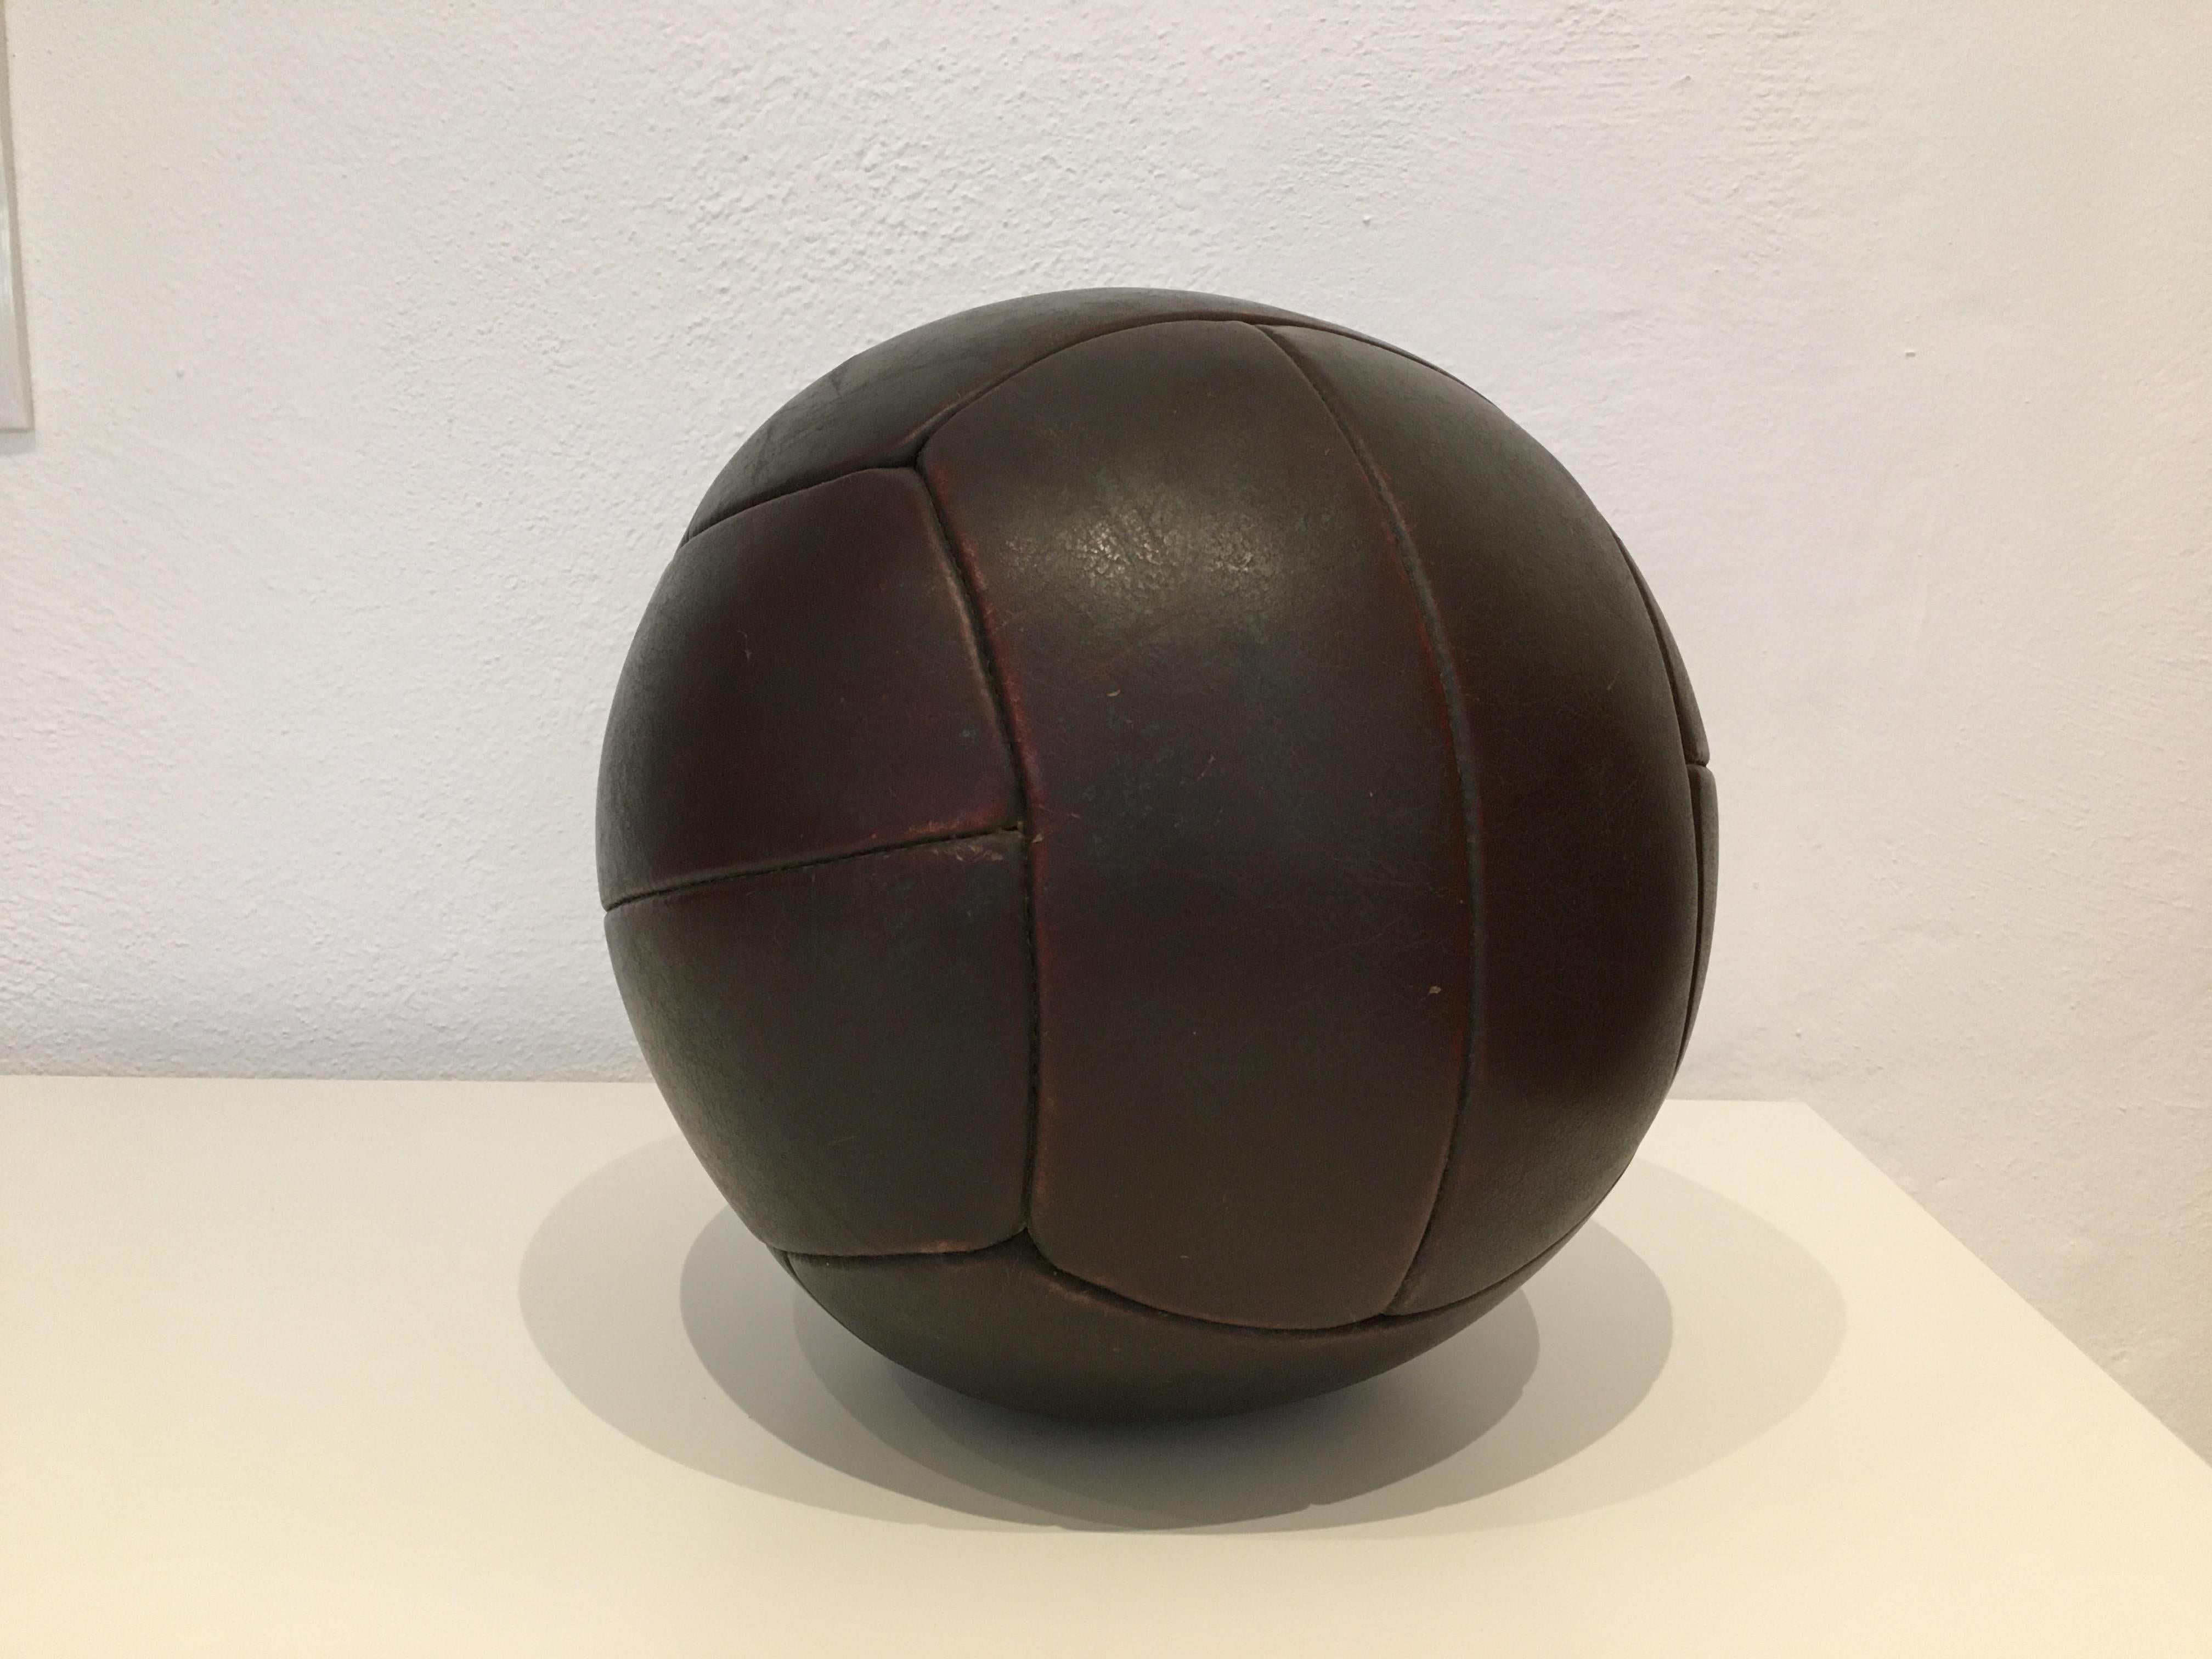 Czech Vintage Mahogany Leather Medicine Ball, 3kg, 1930s For Sale